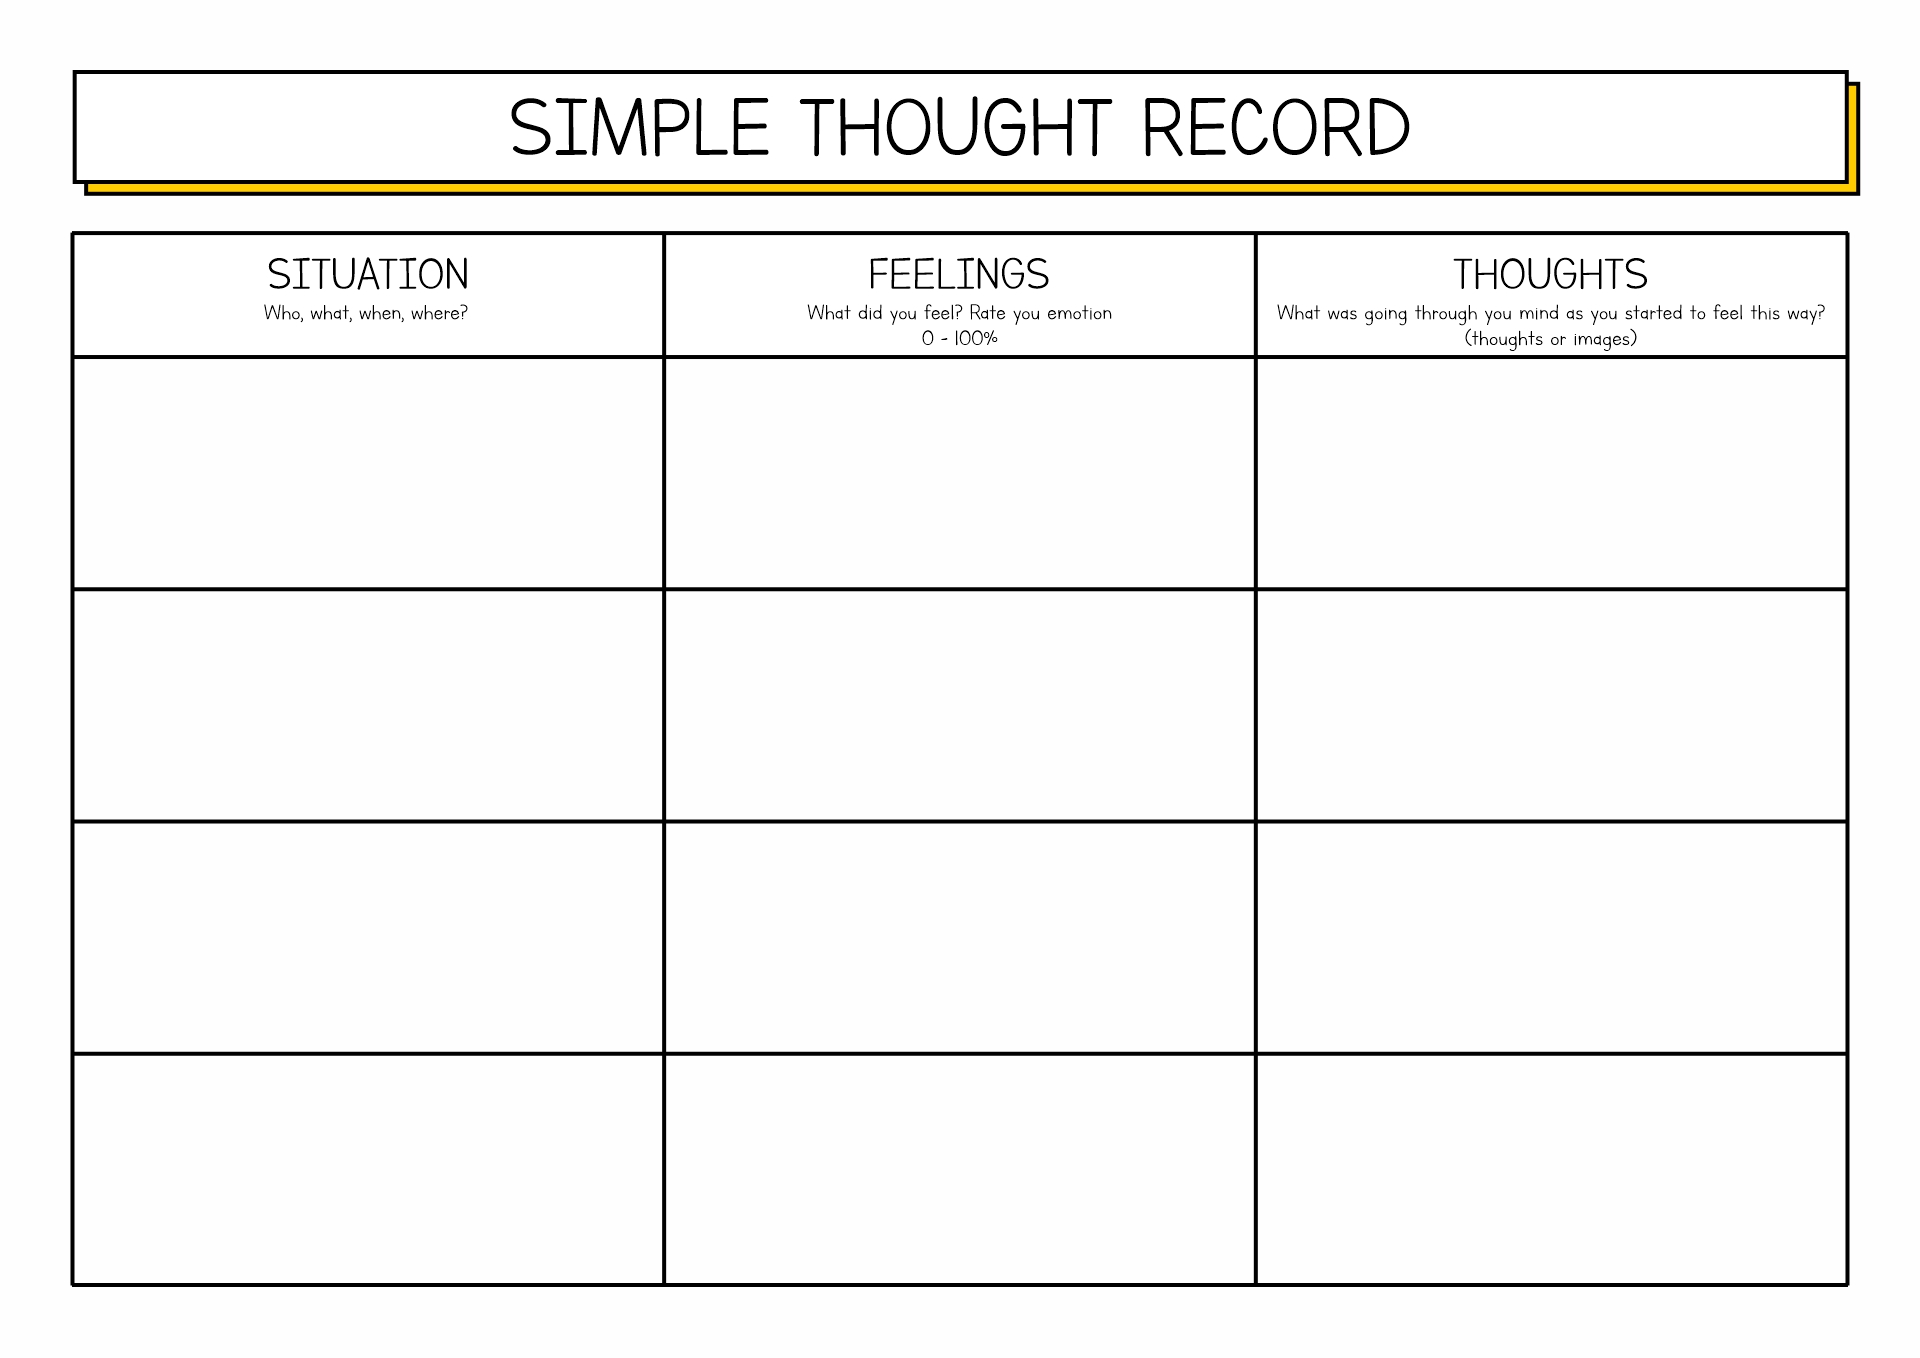 CBT Thought Record Worksheet Image